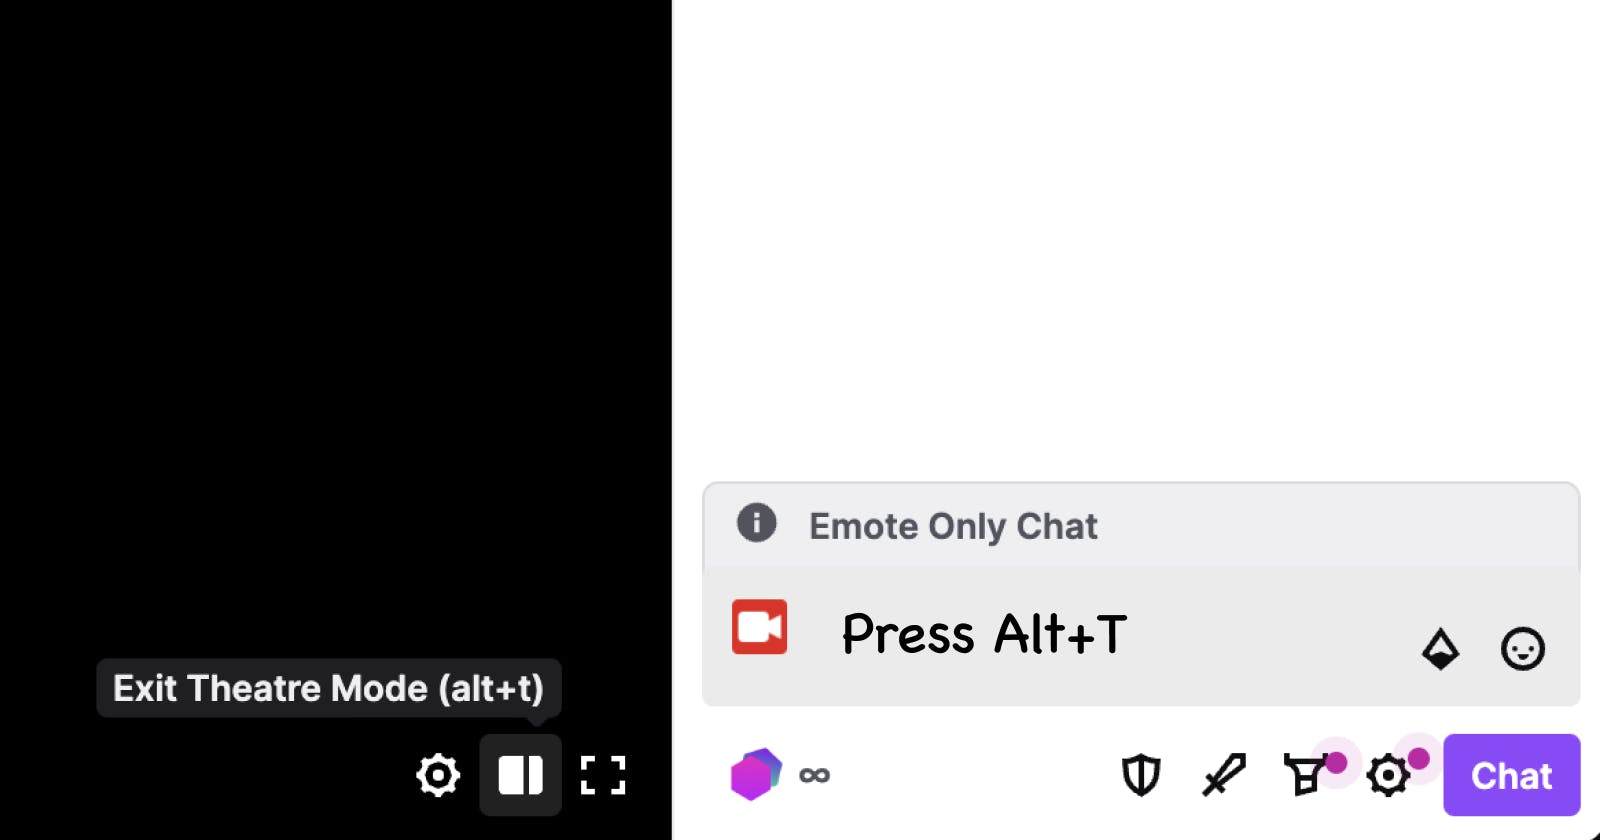 Use light mode chat in Twitch Theatre Mode